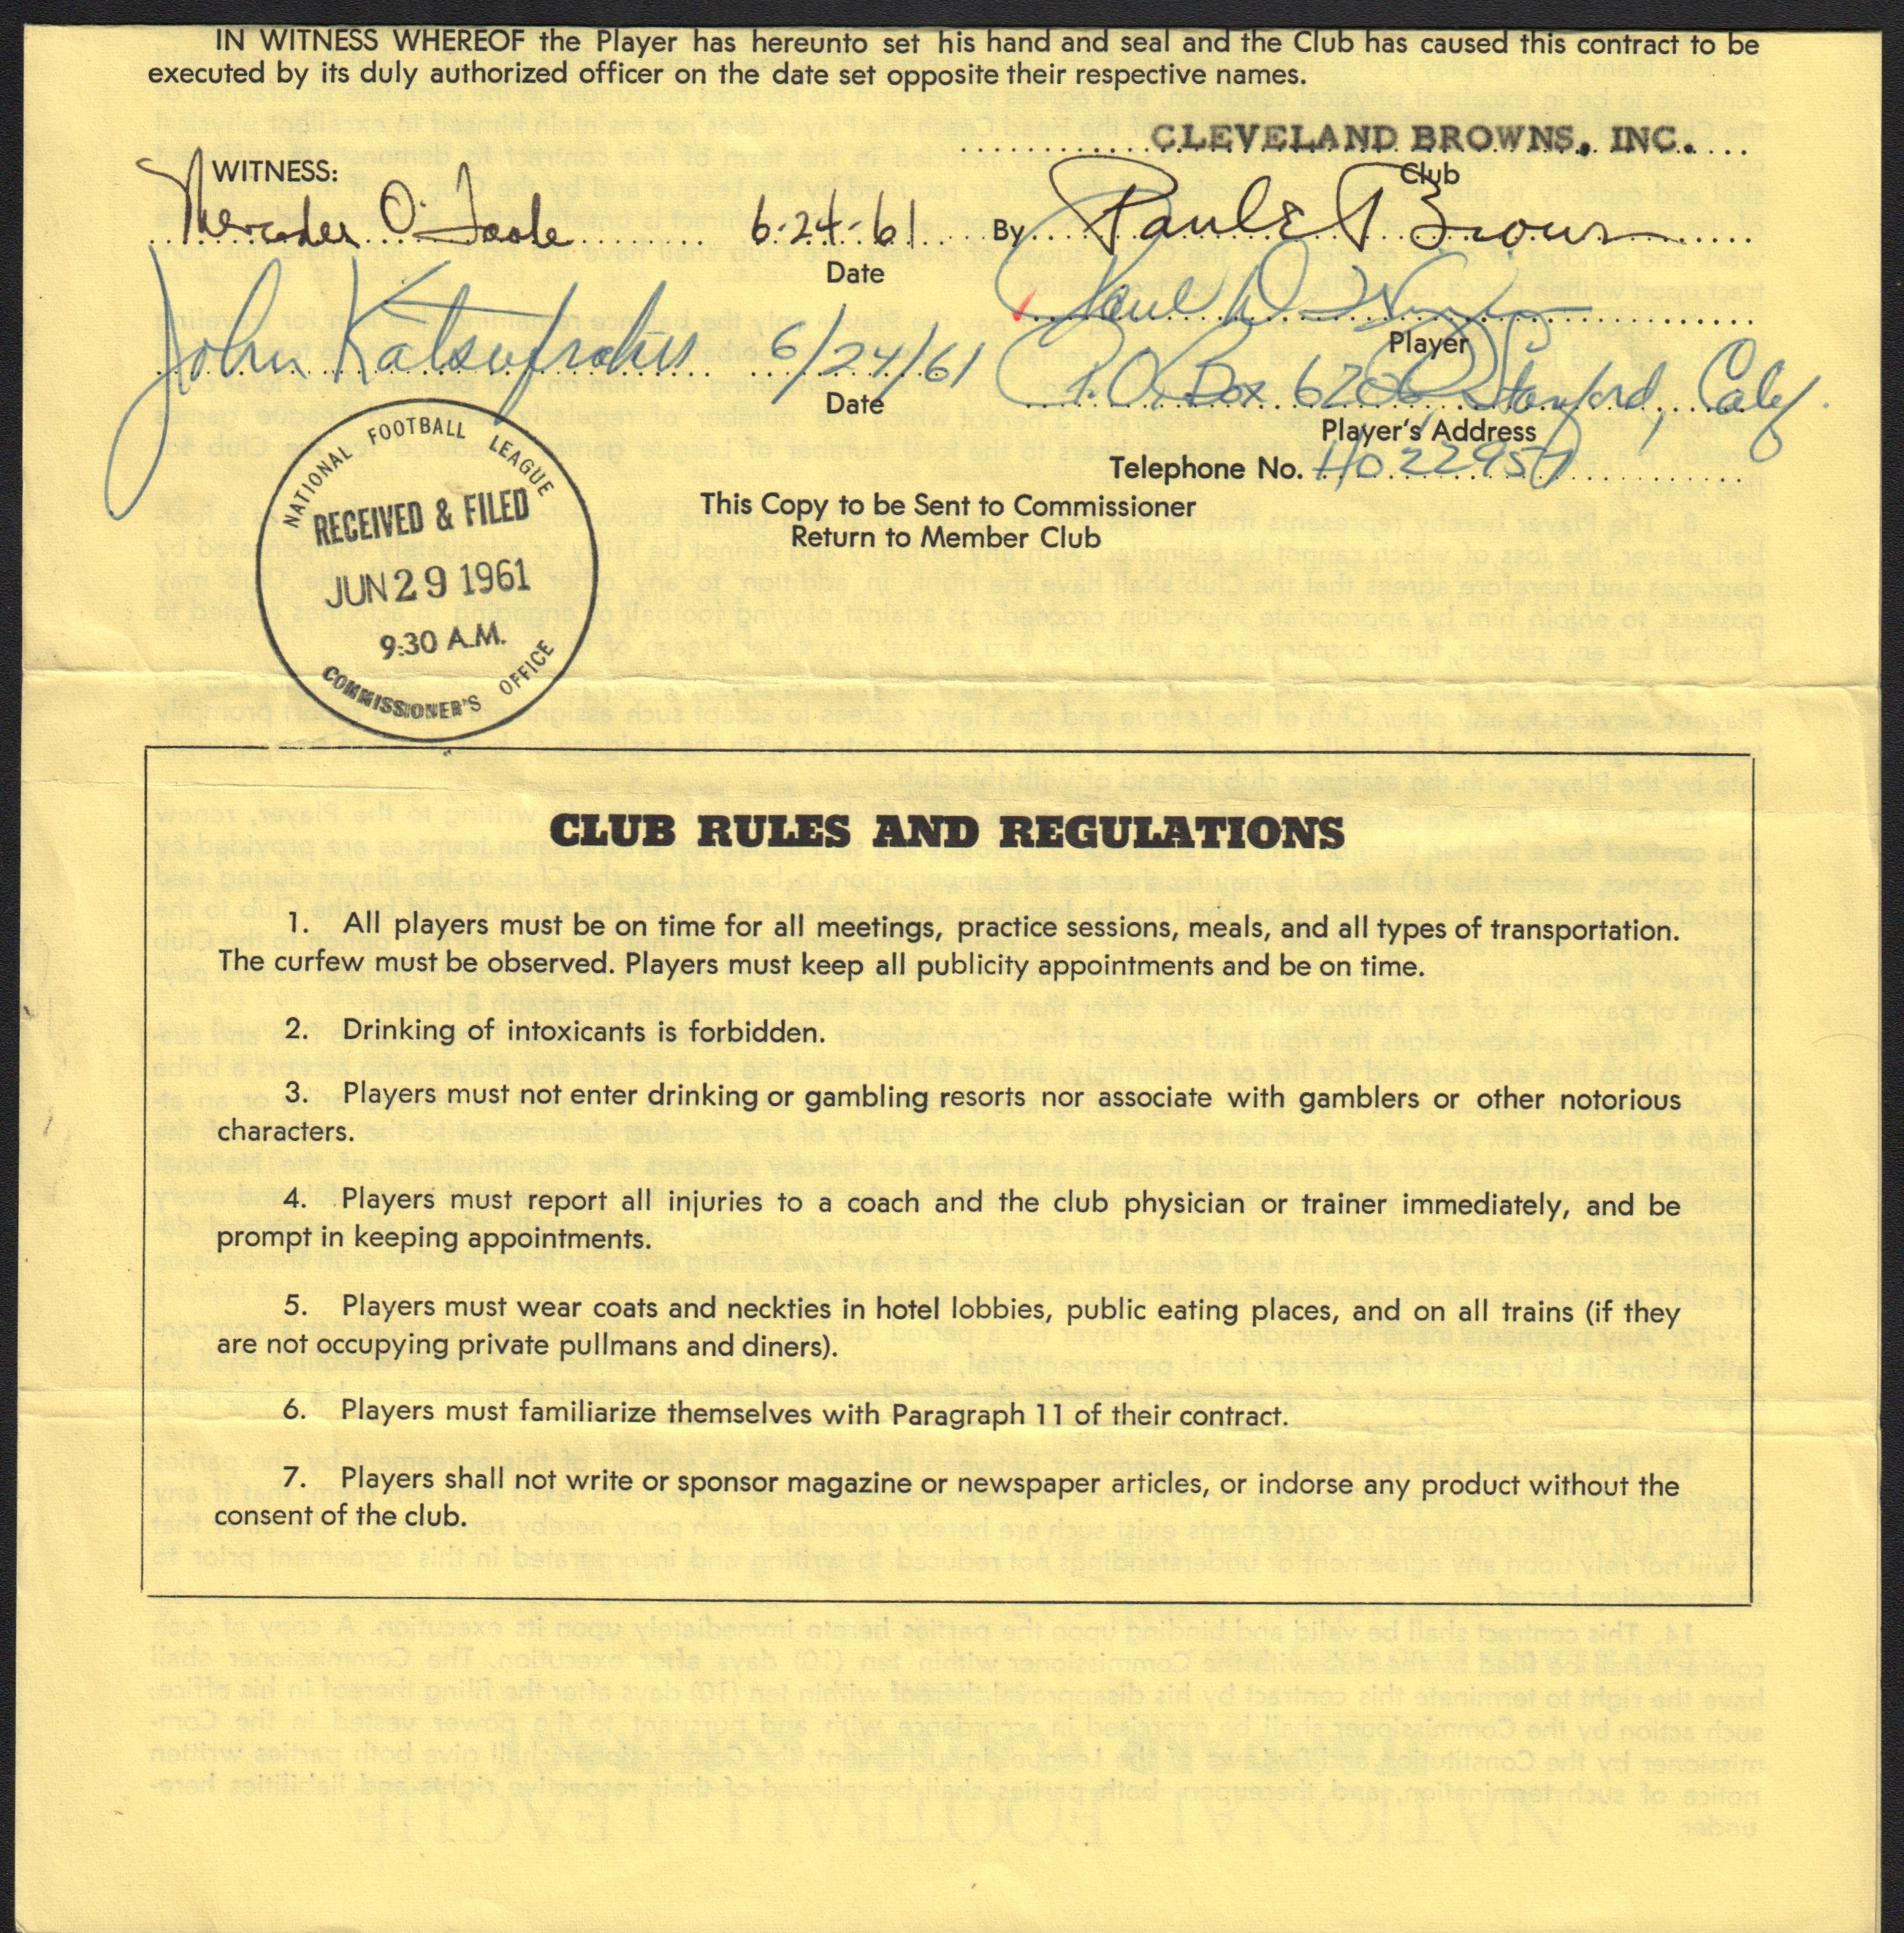 - 1959 Cleveland Browns Contract Signed by Paul Brown